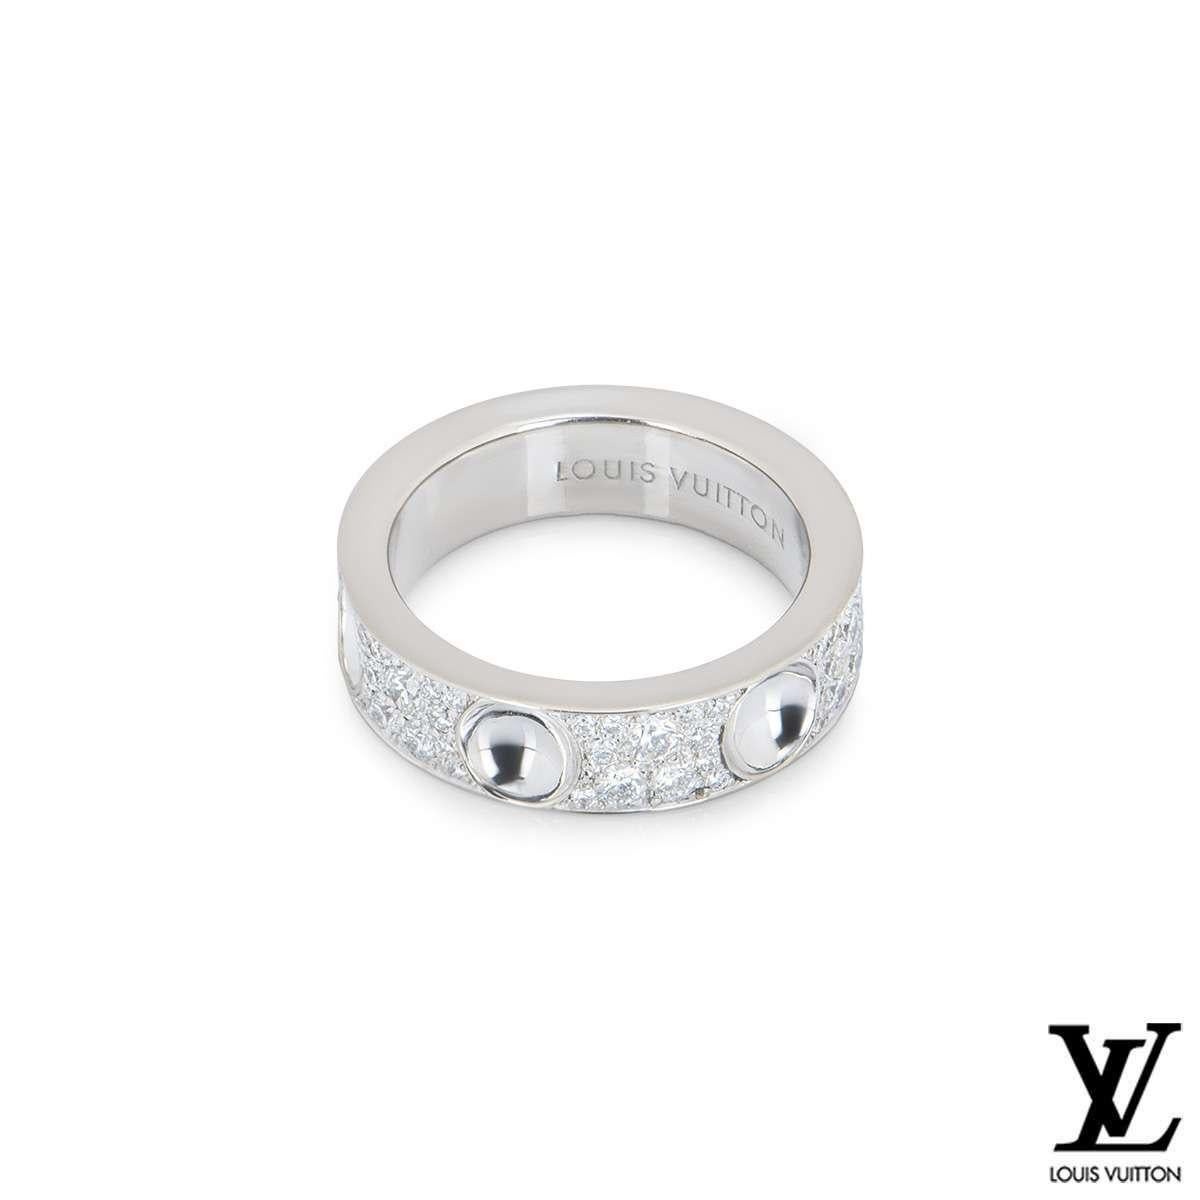 A stunning diamond set ring from the Empreinte collection by Louis Vuitton. The ring features 6 inverted stud motifs, one engraved with the Louis Vuitton logo. Set in-between each stud are pave set round brilliant cut diamonds totalling